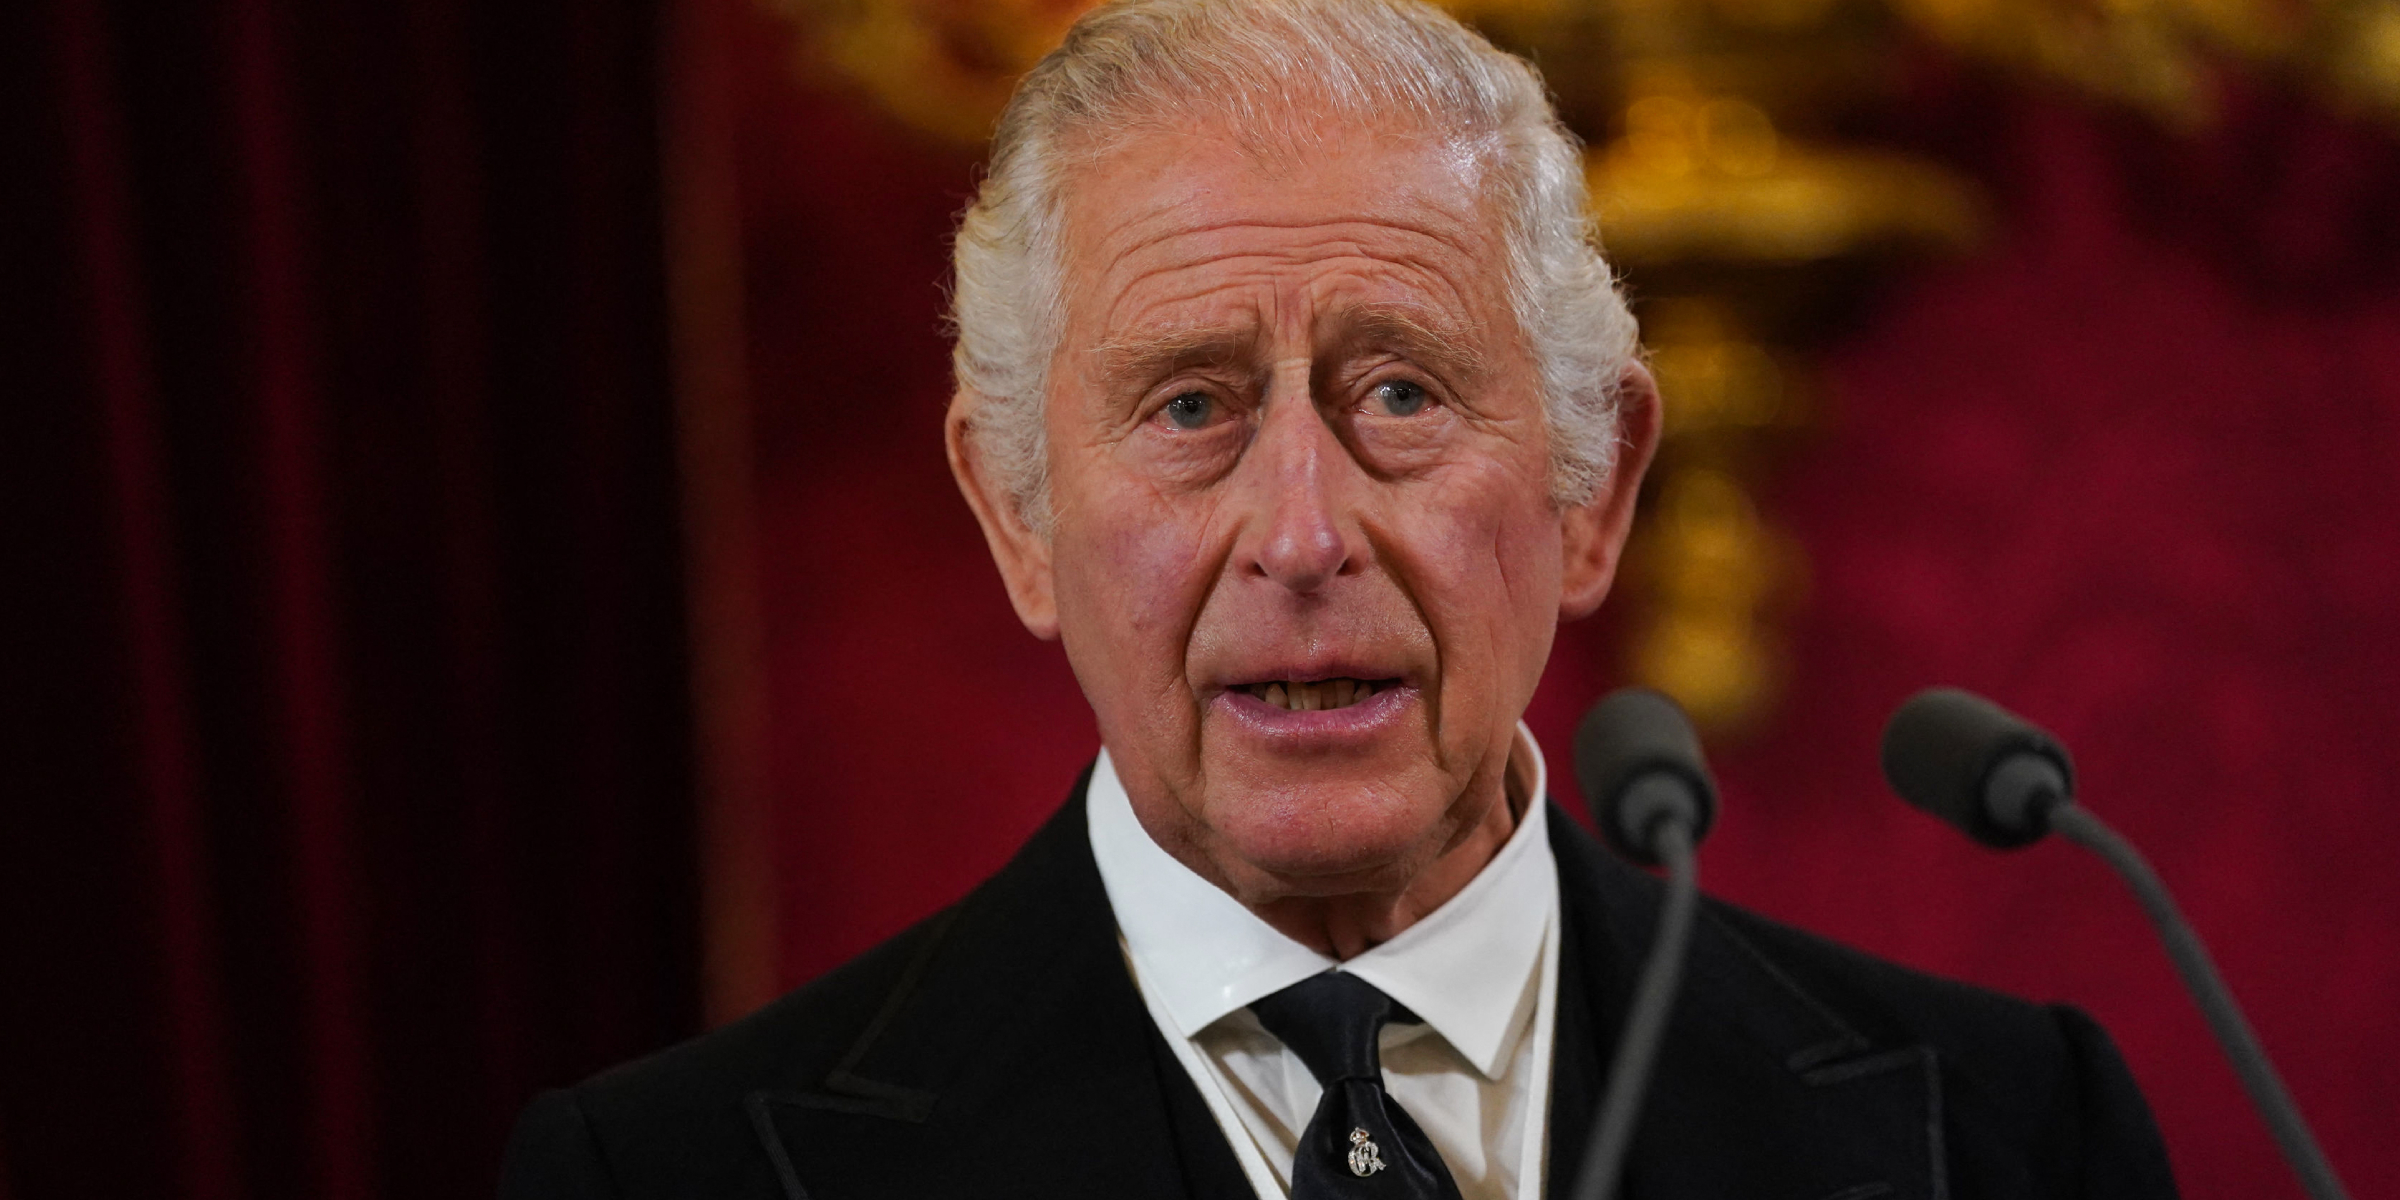 King Charles III | Source: Getty Images